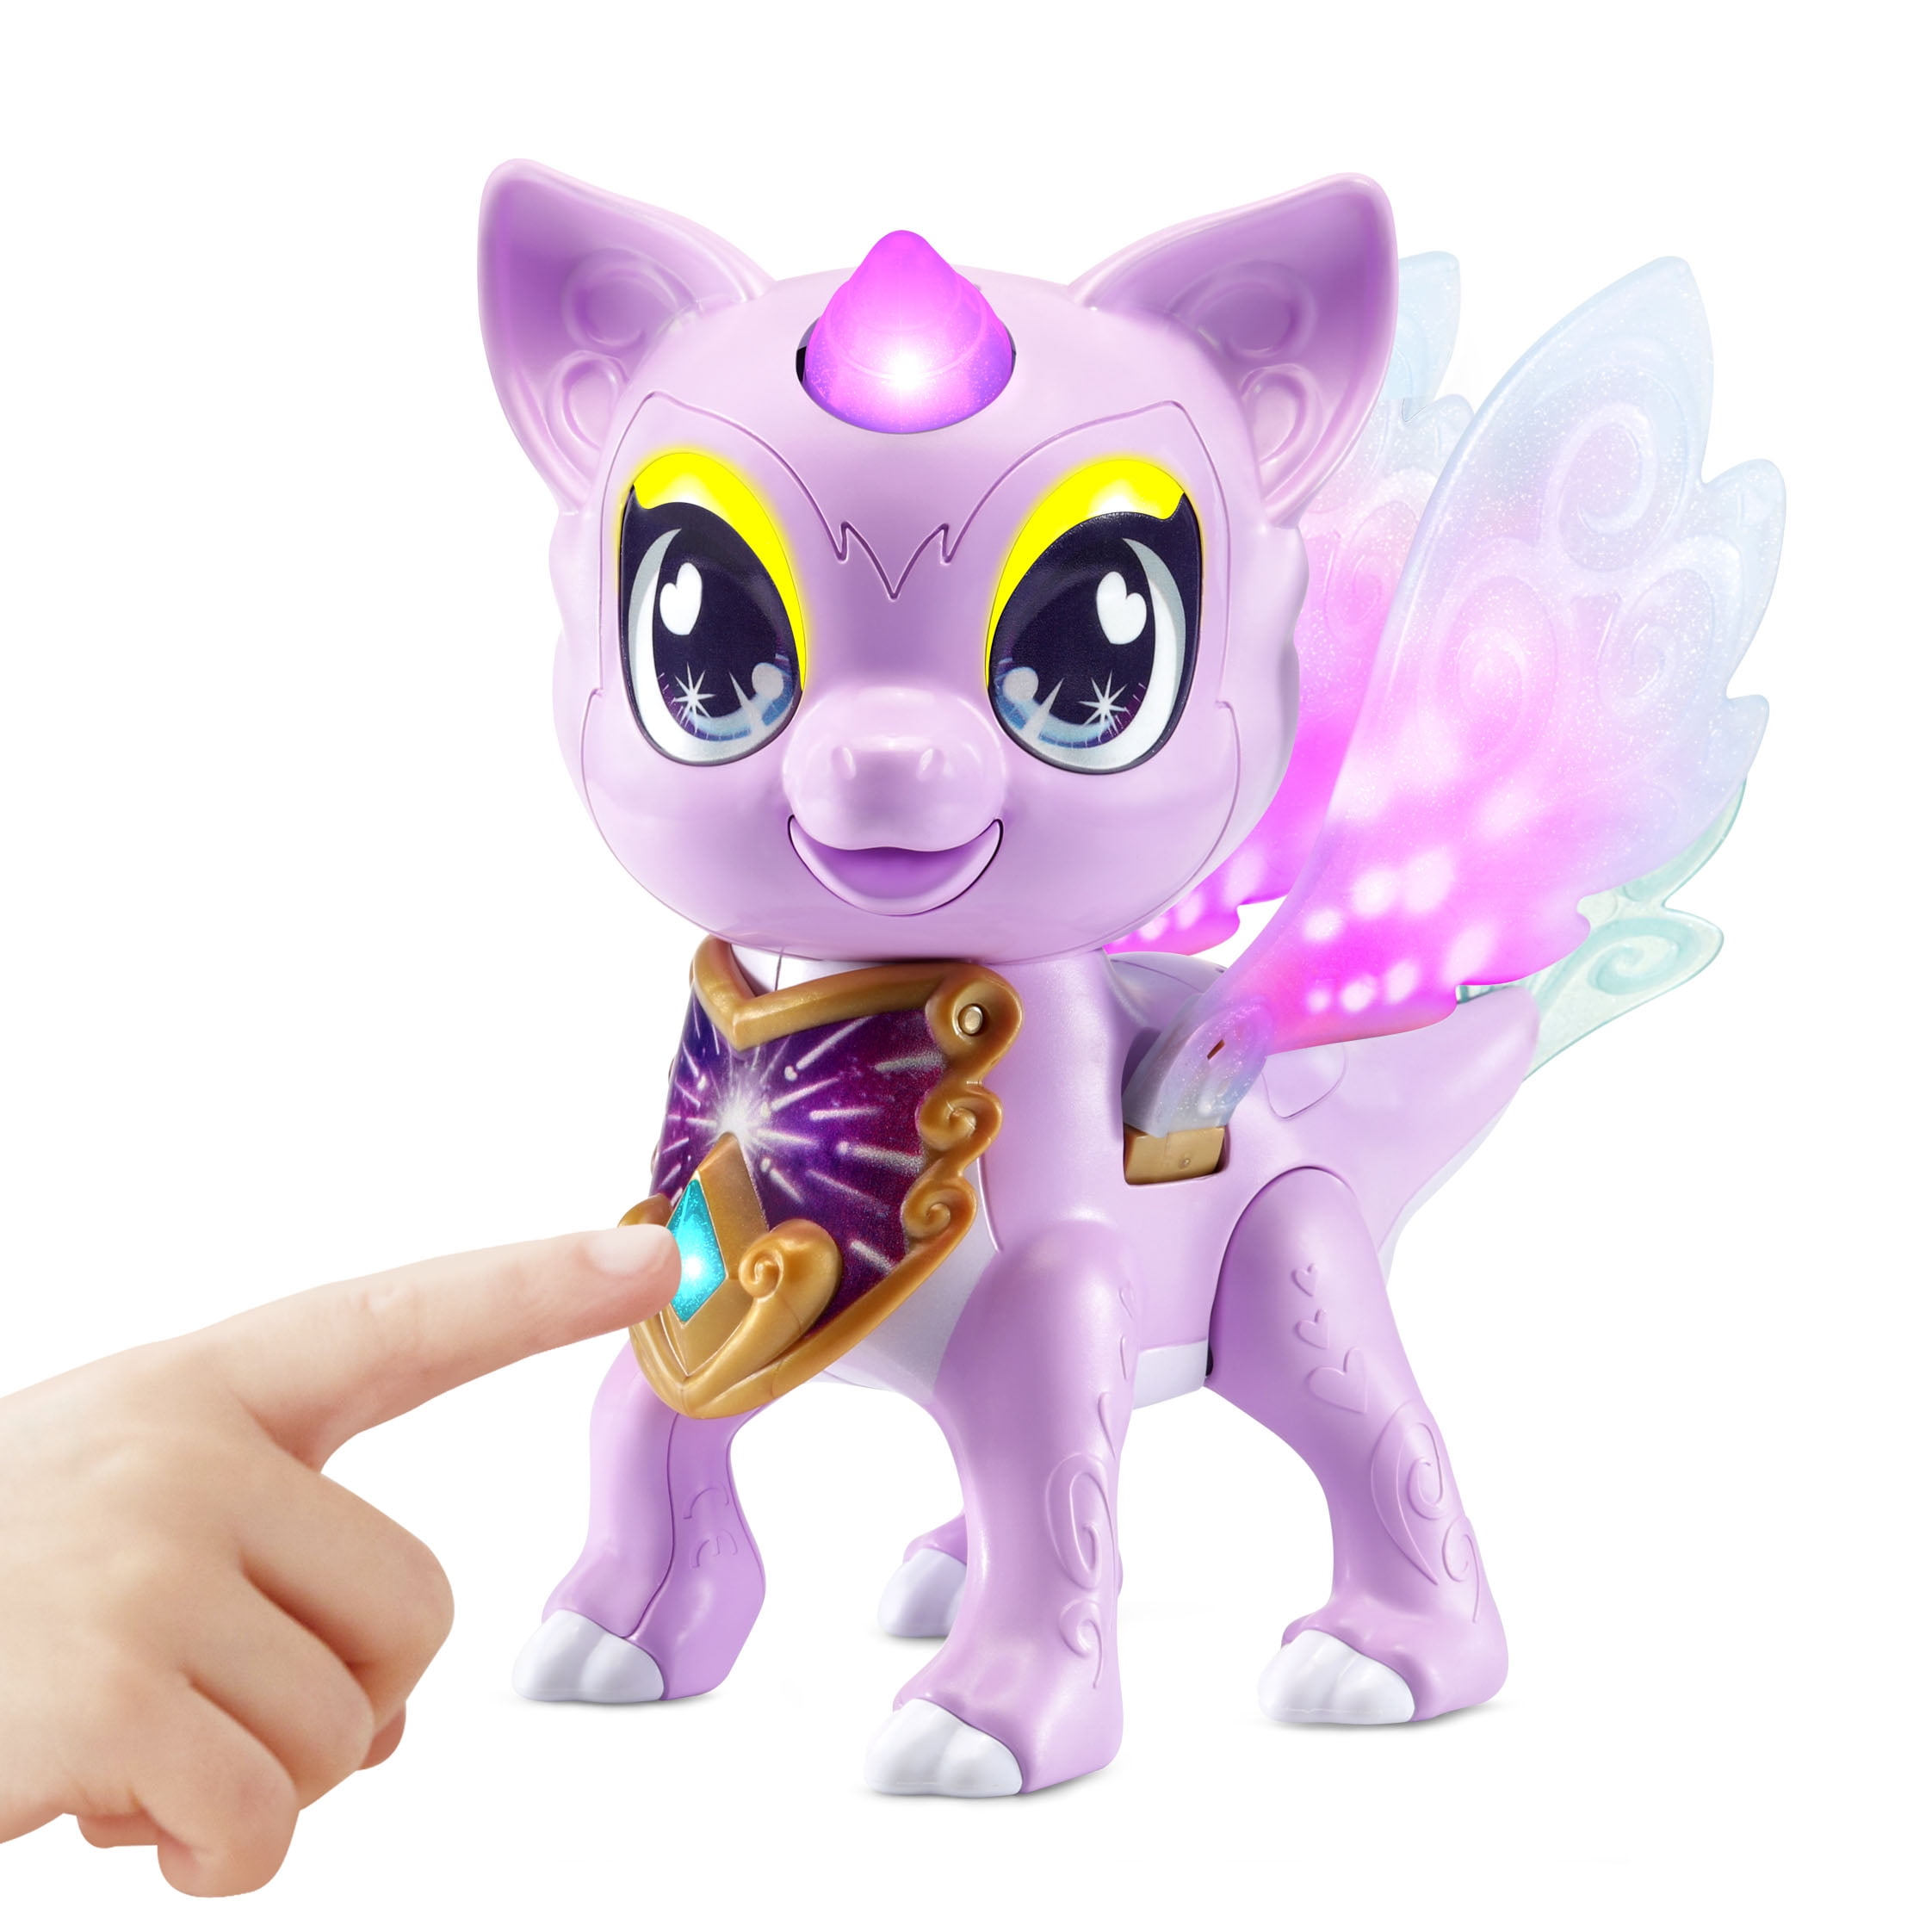 Piper the Dragon Talking Interactive NEW in Box VTech Myla's Sparkling Friends 